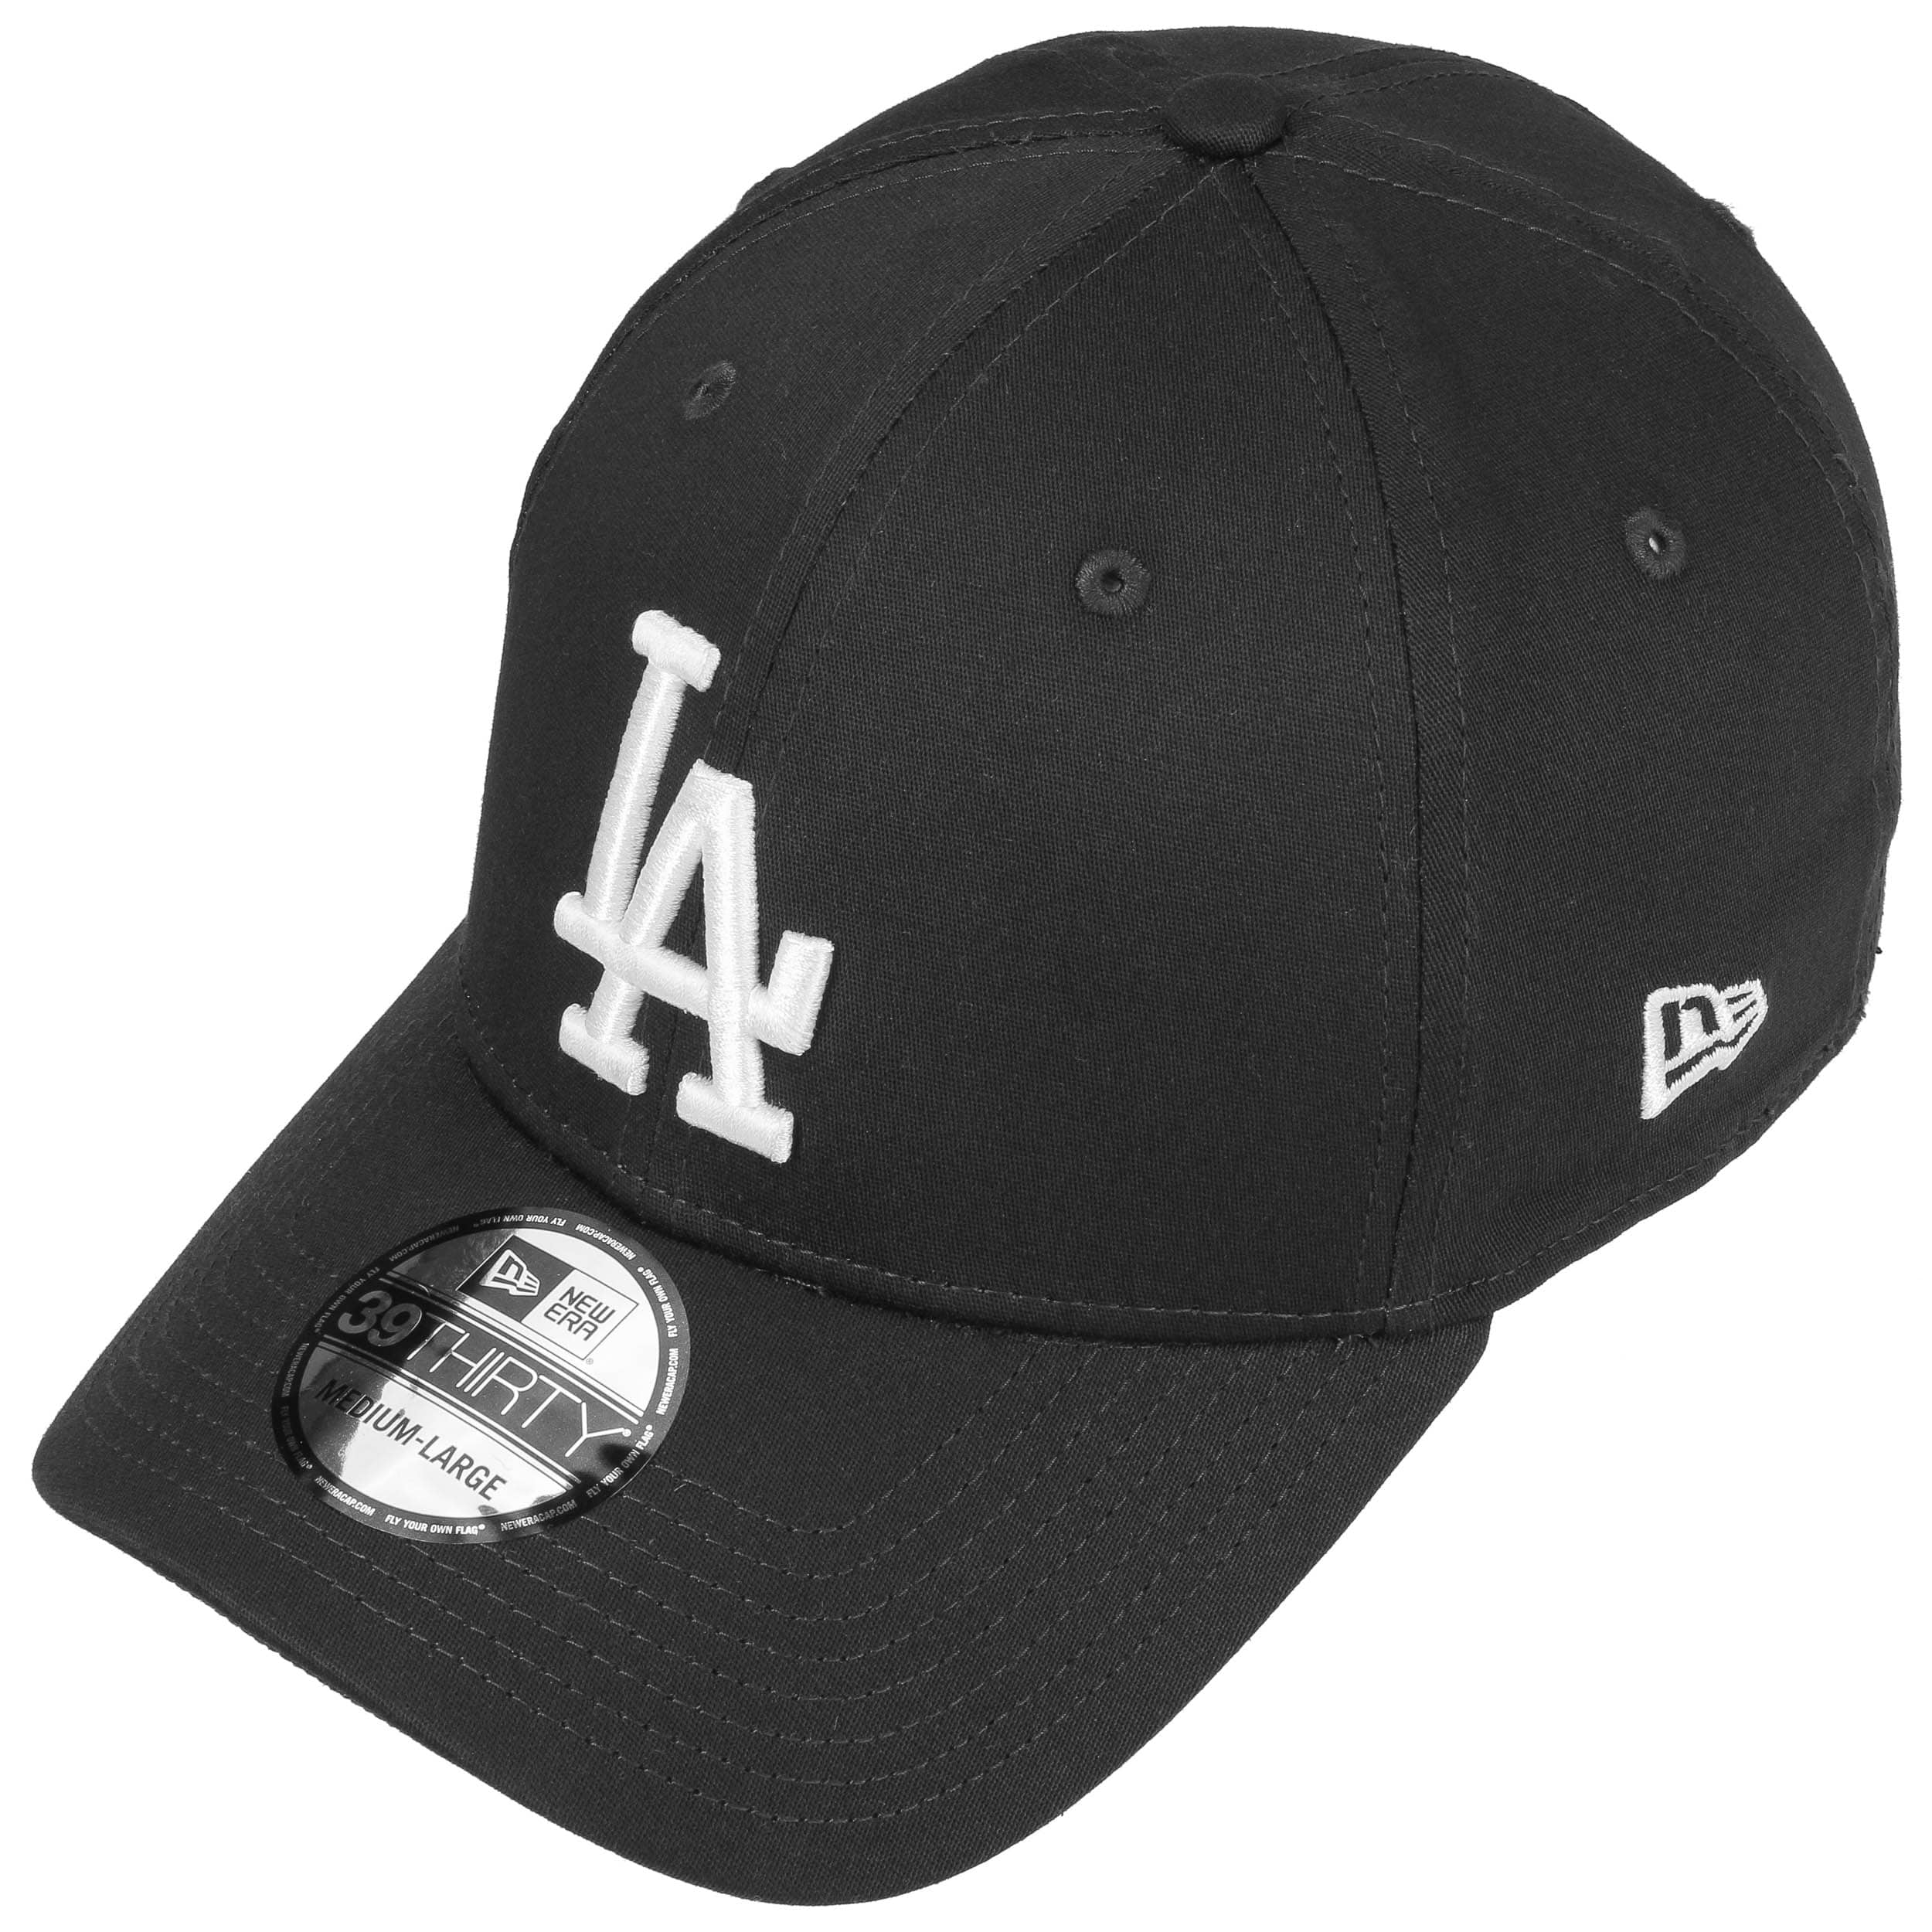 New Era Cap - Don't leave this collection up to second